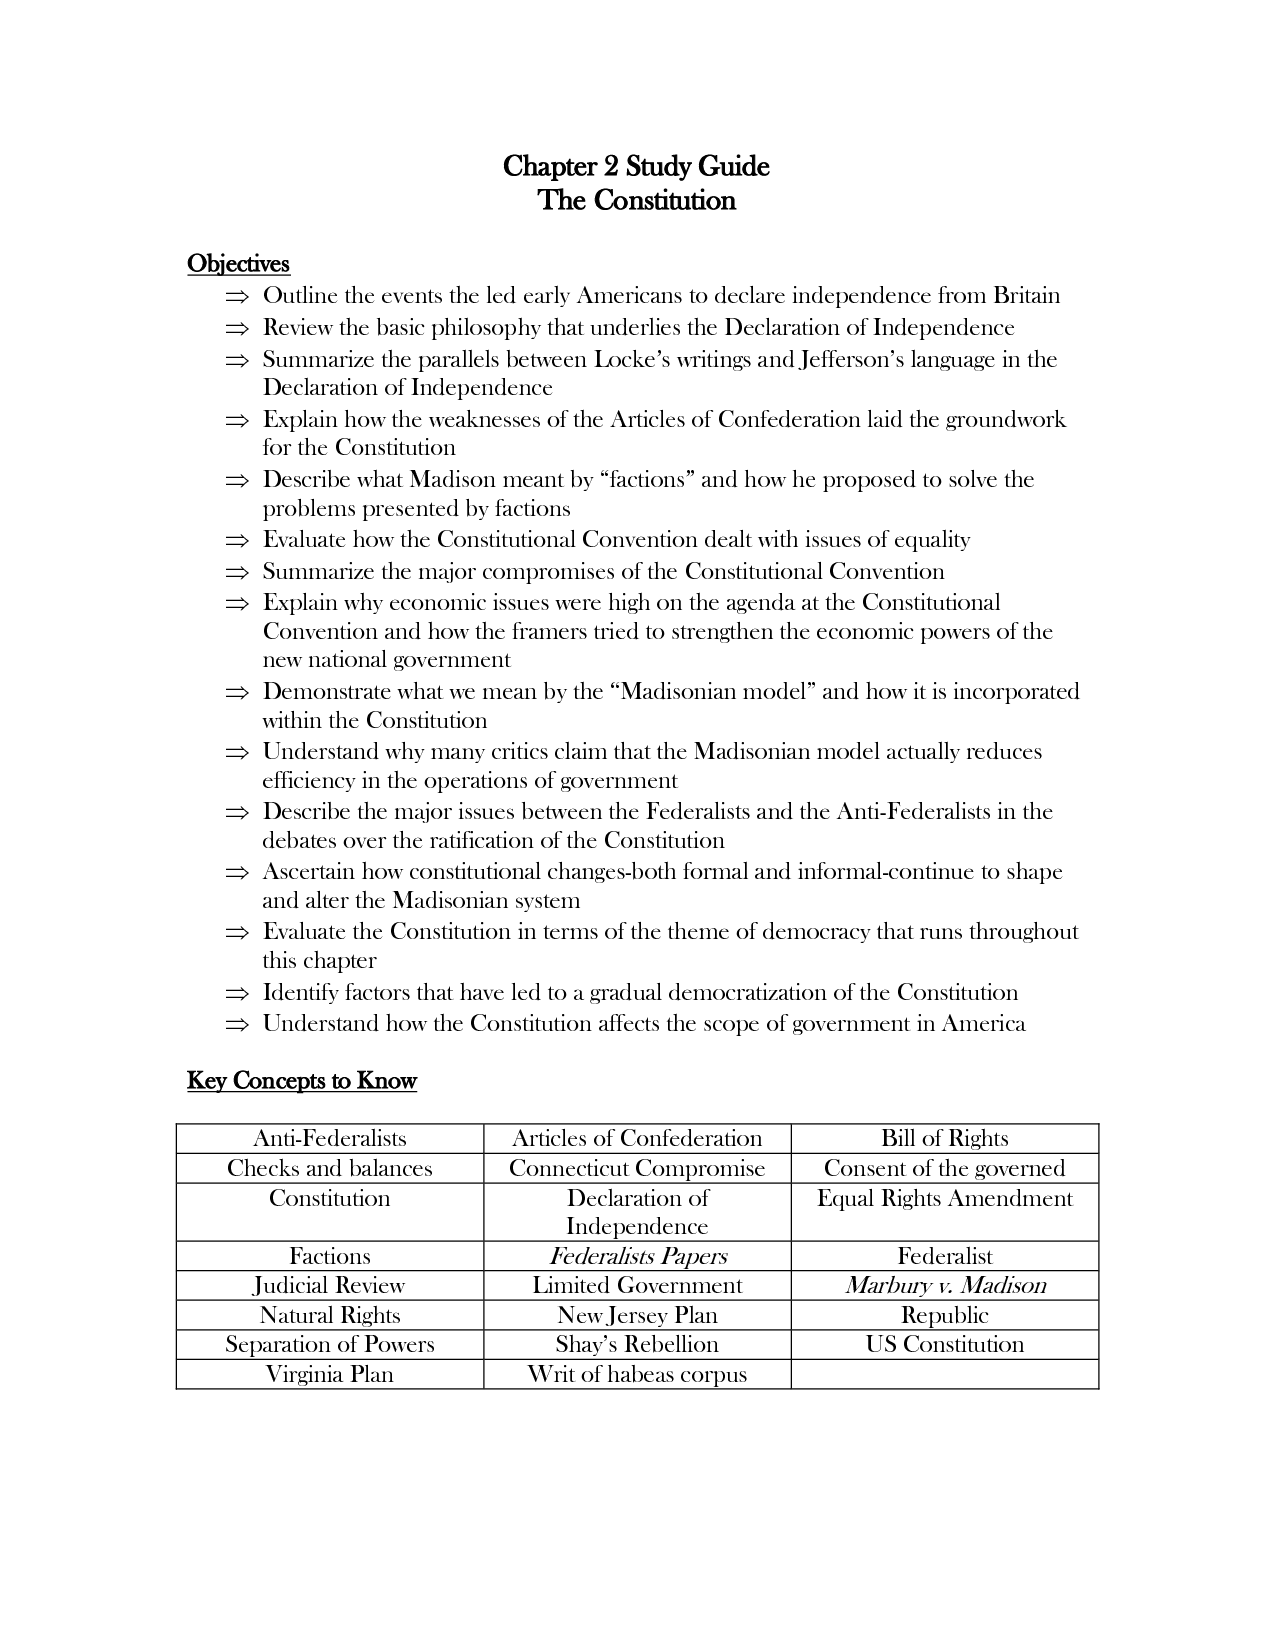 Articles of Confederation Weaknesses Worksheet Image